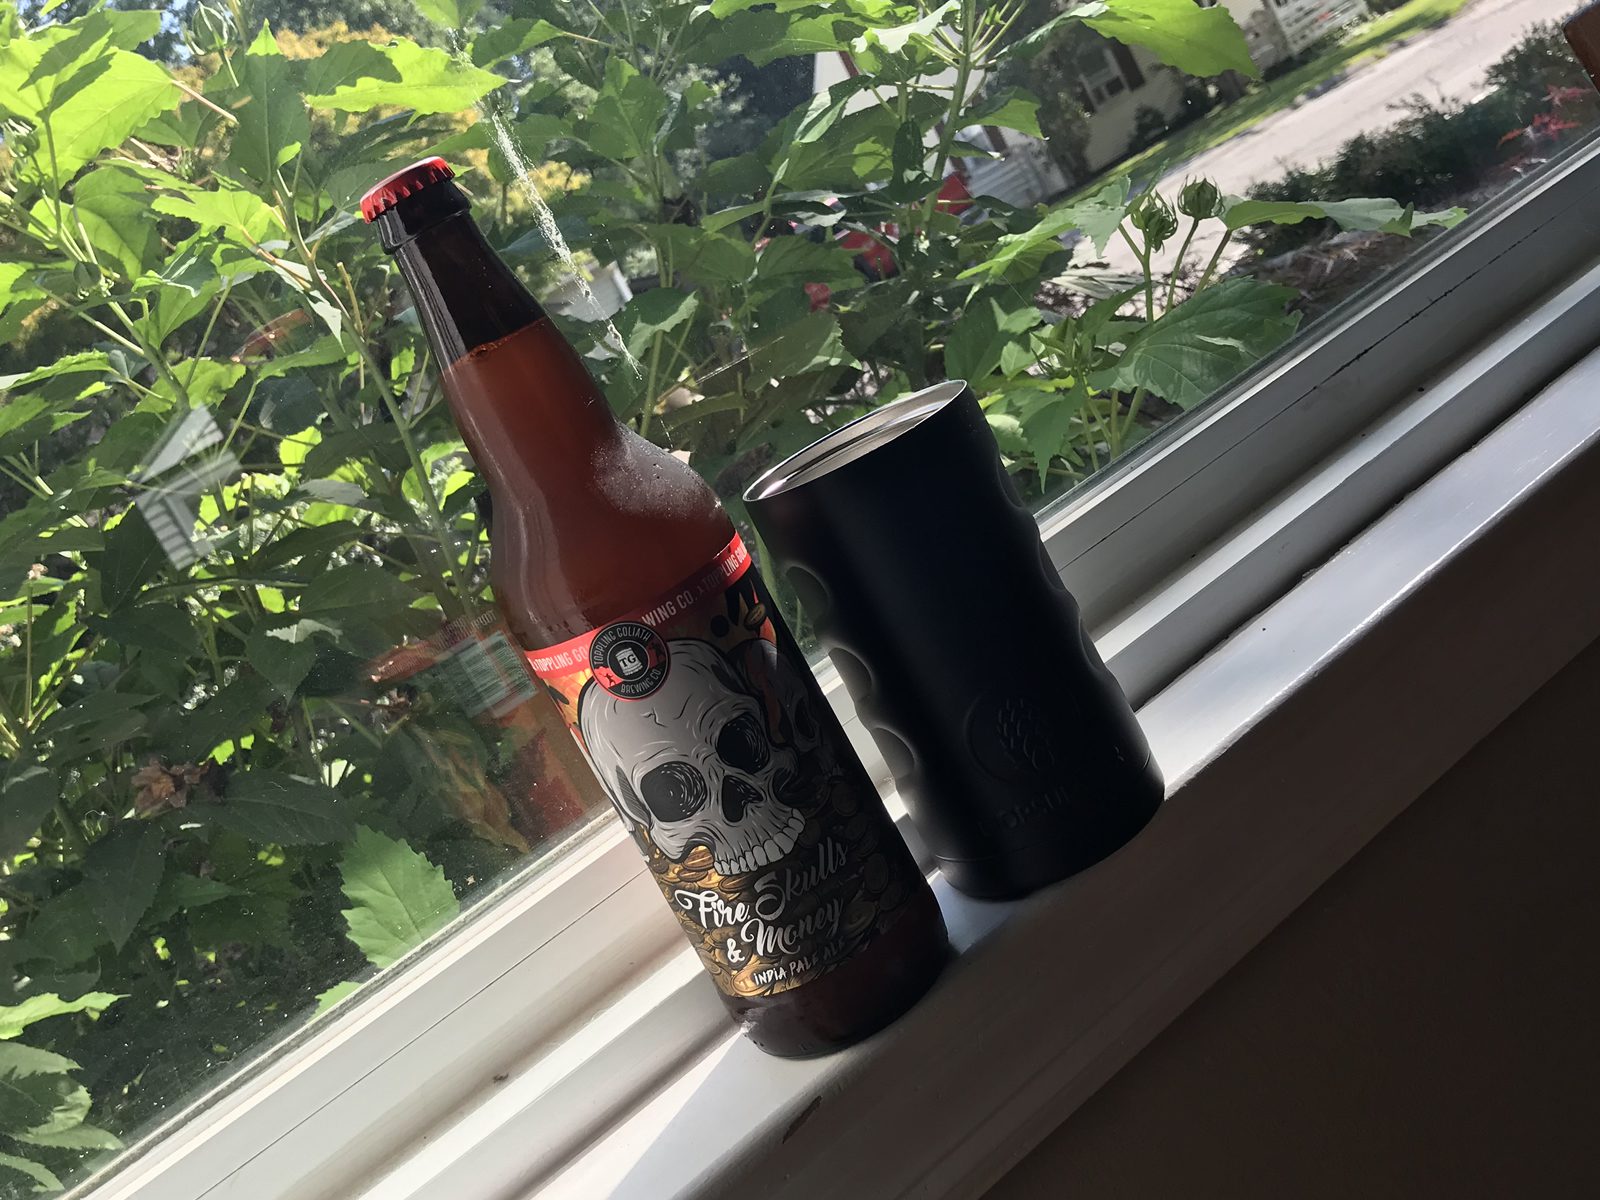 Toppling Goliath Brewing Company: Fire, Skulls and Money